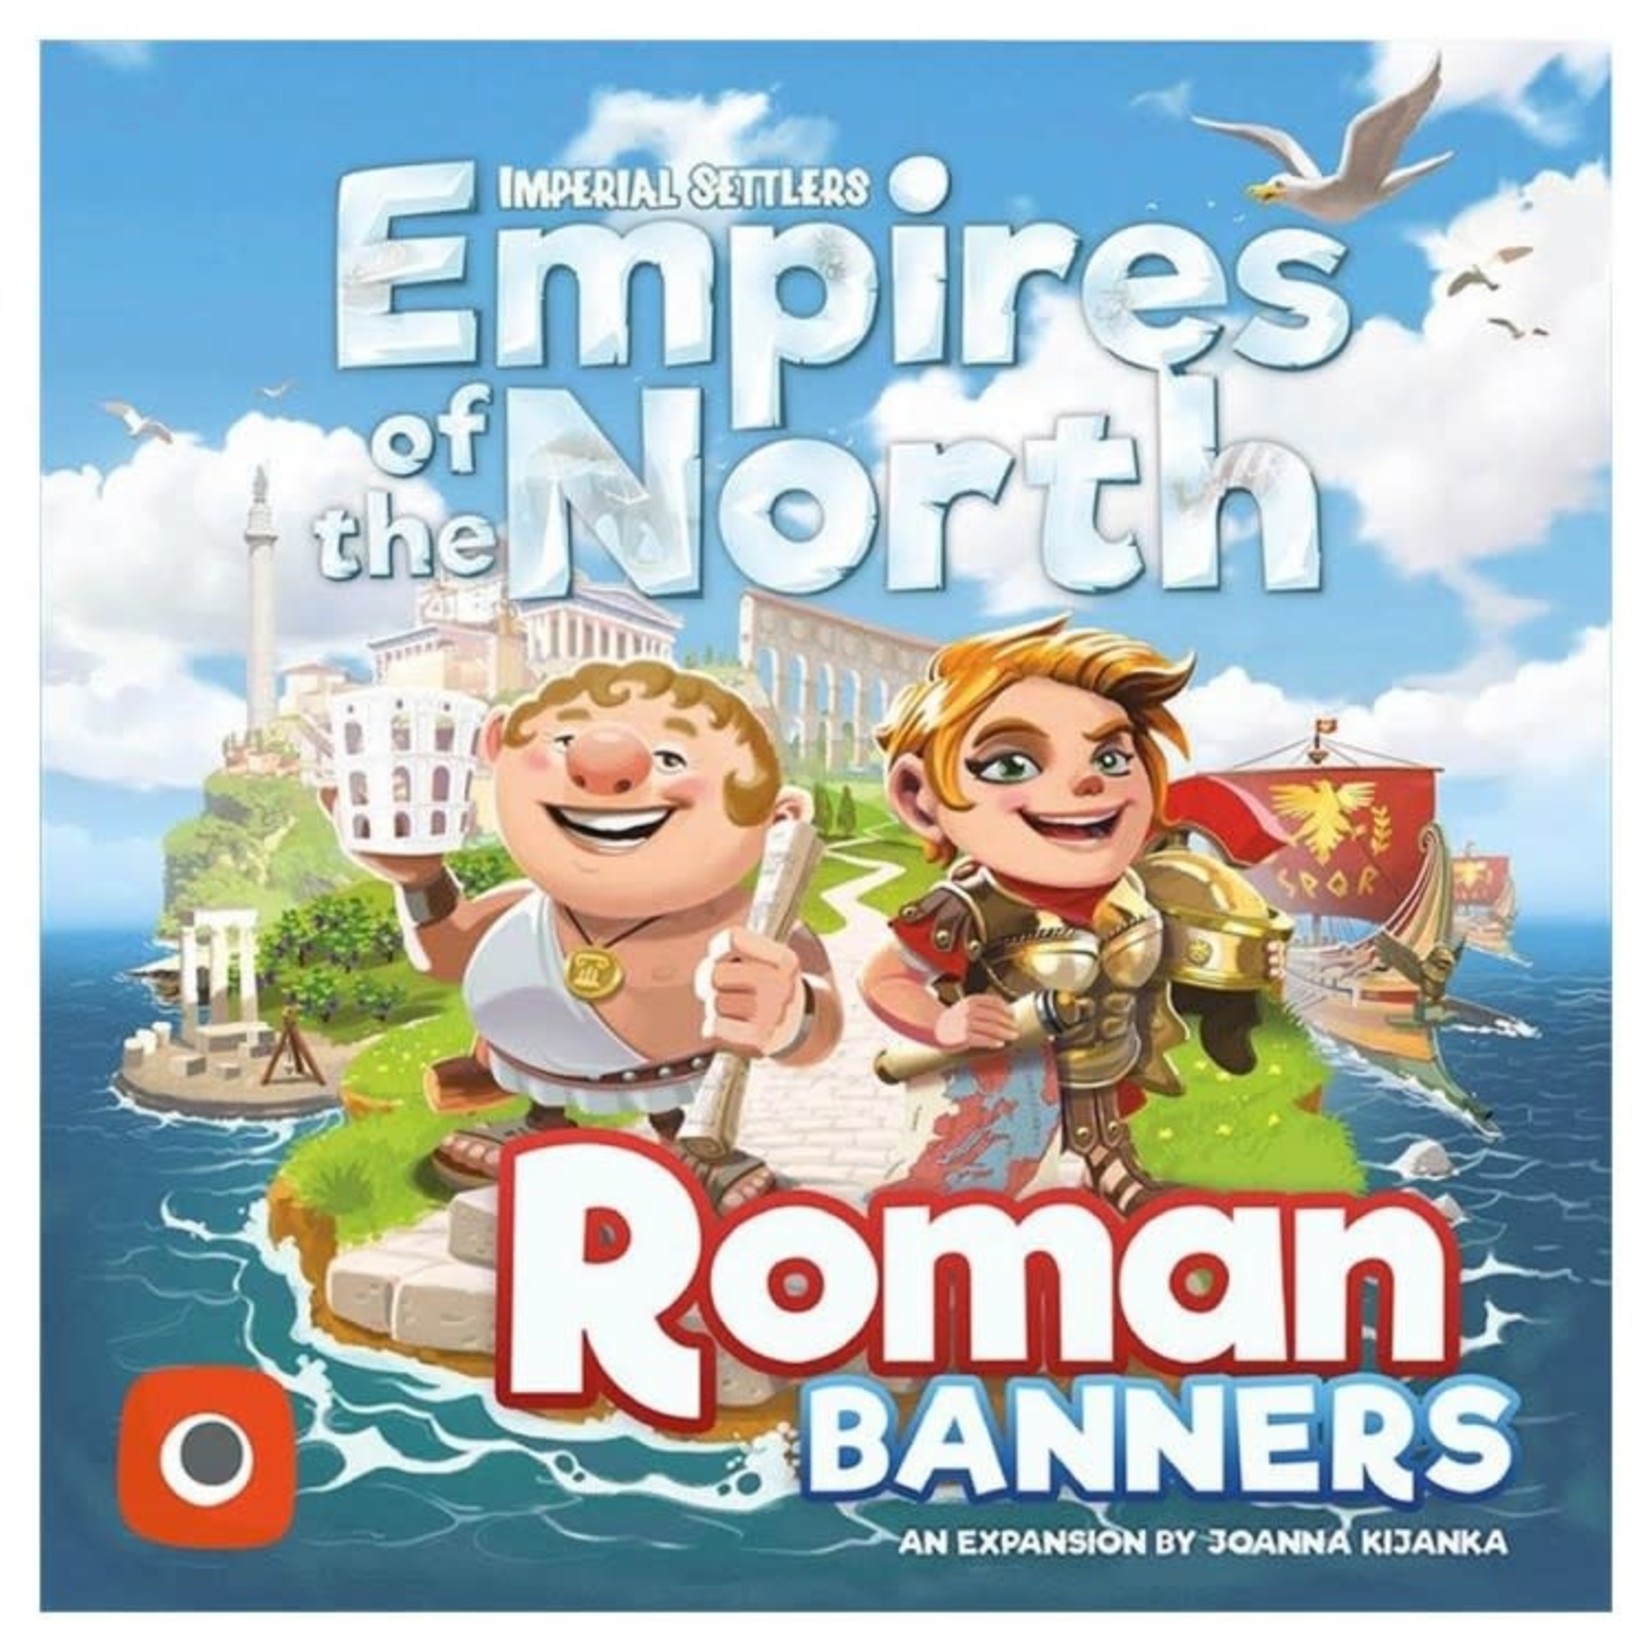 Portal Games Imperial Settlers Empires of the North Roman Banners